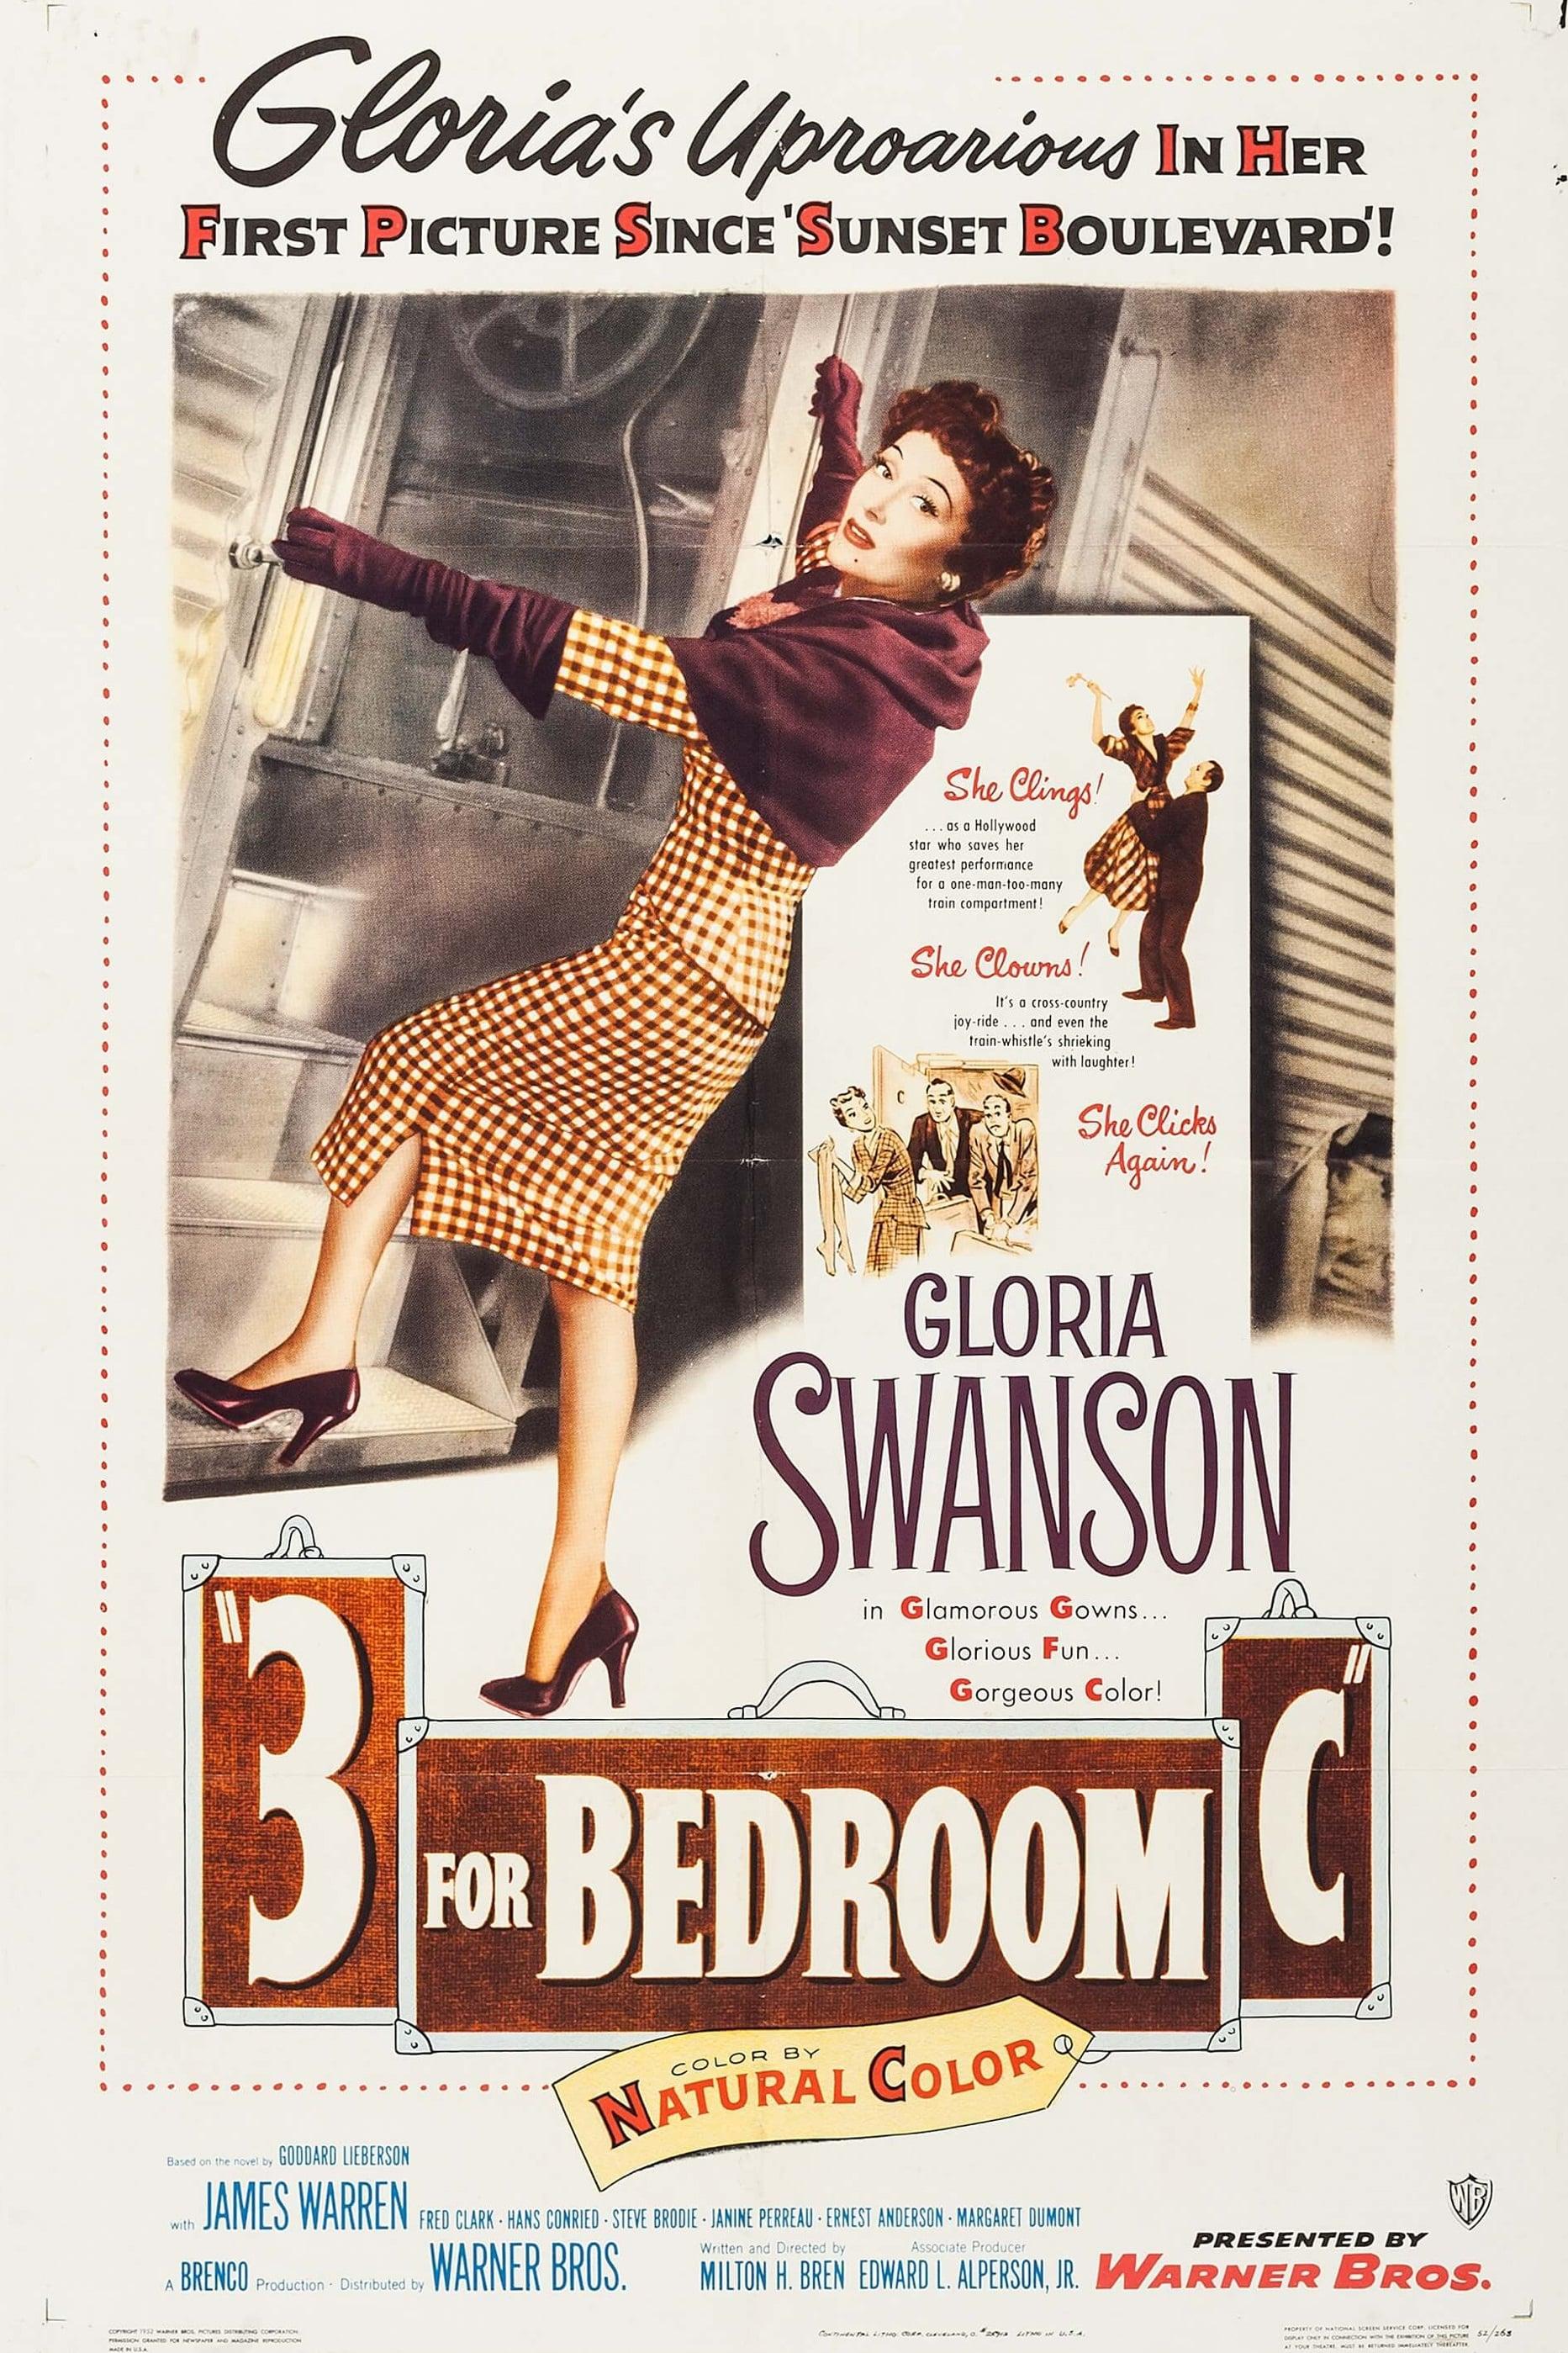 Three for Bedroom C poster